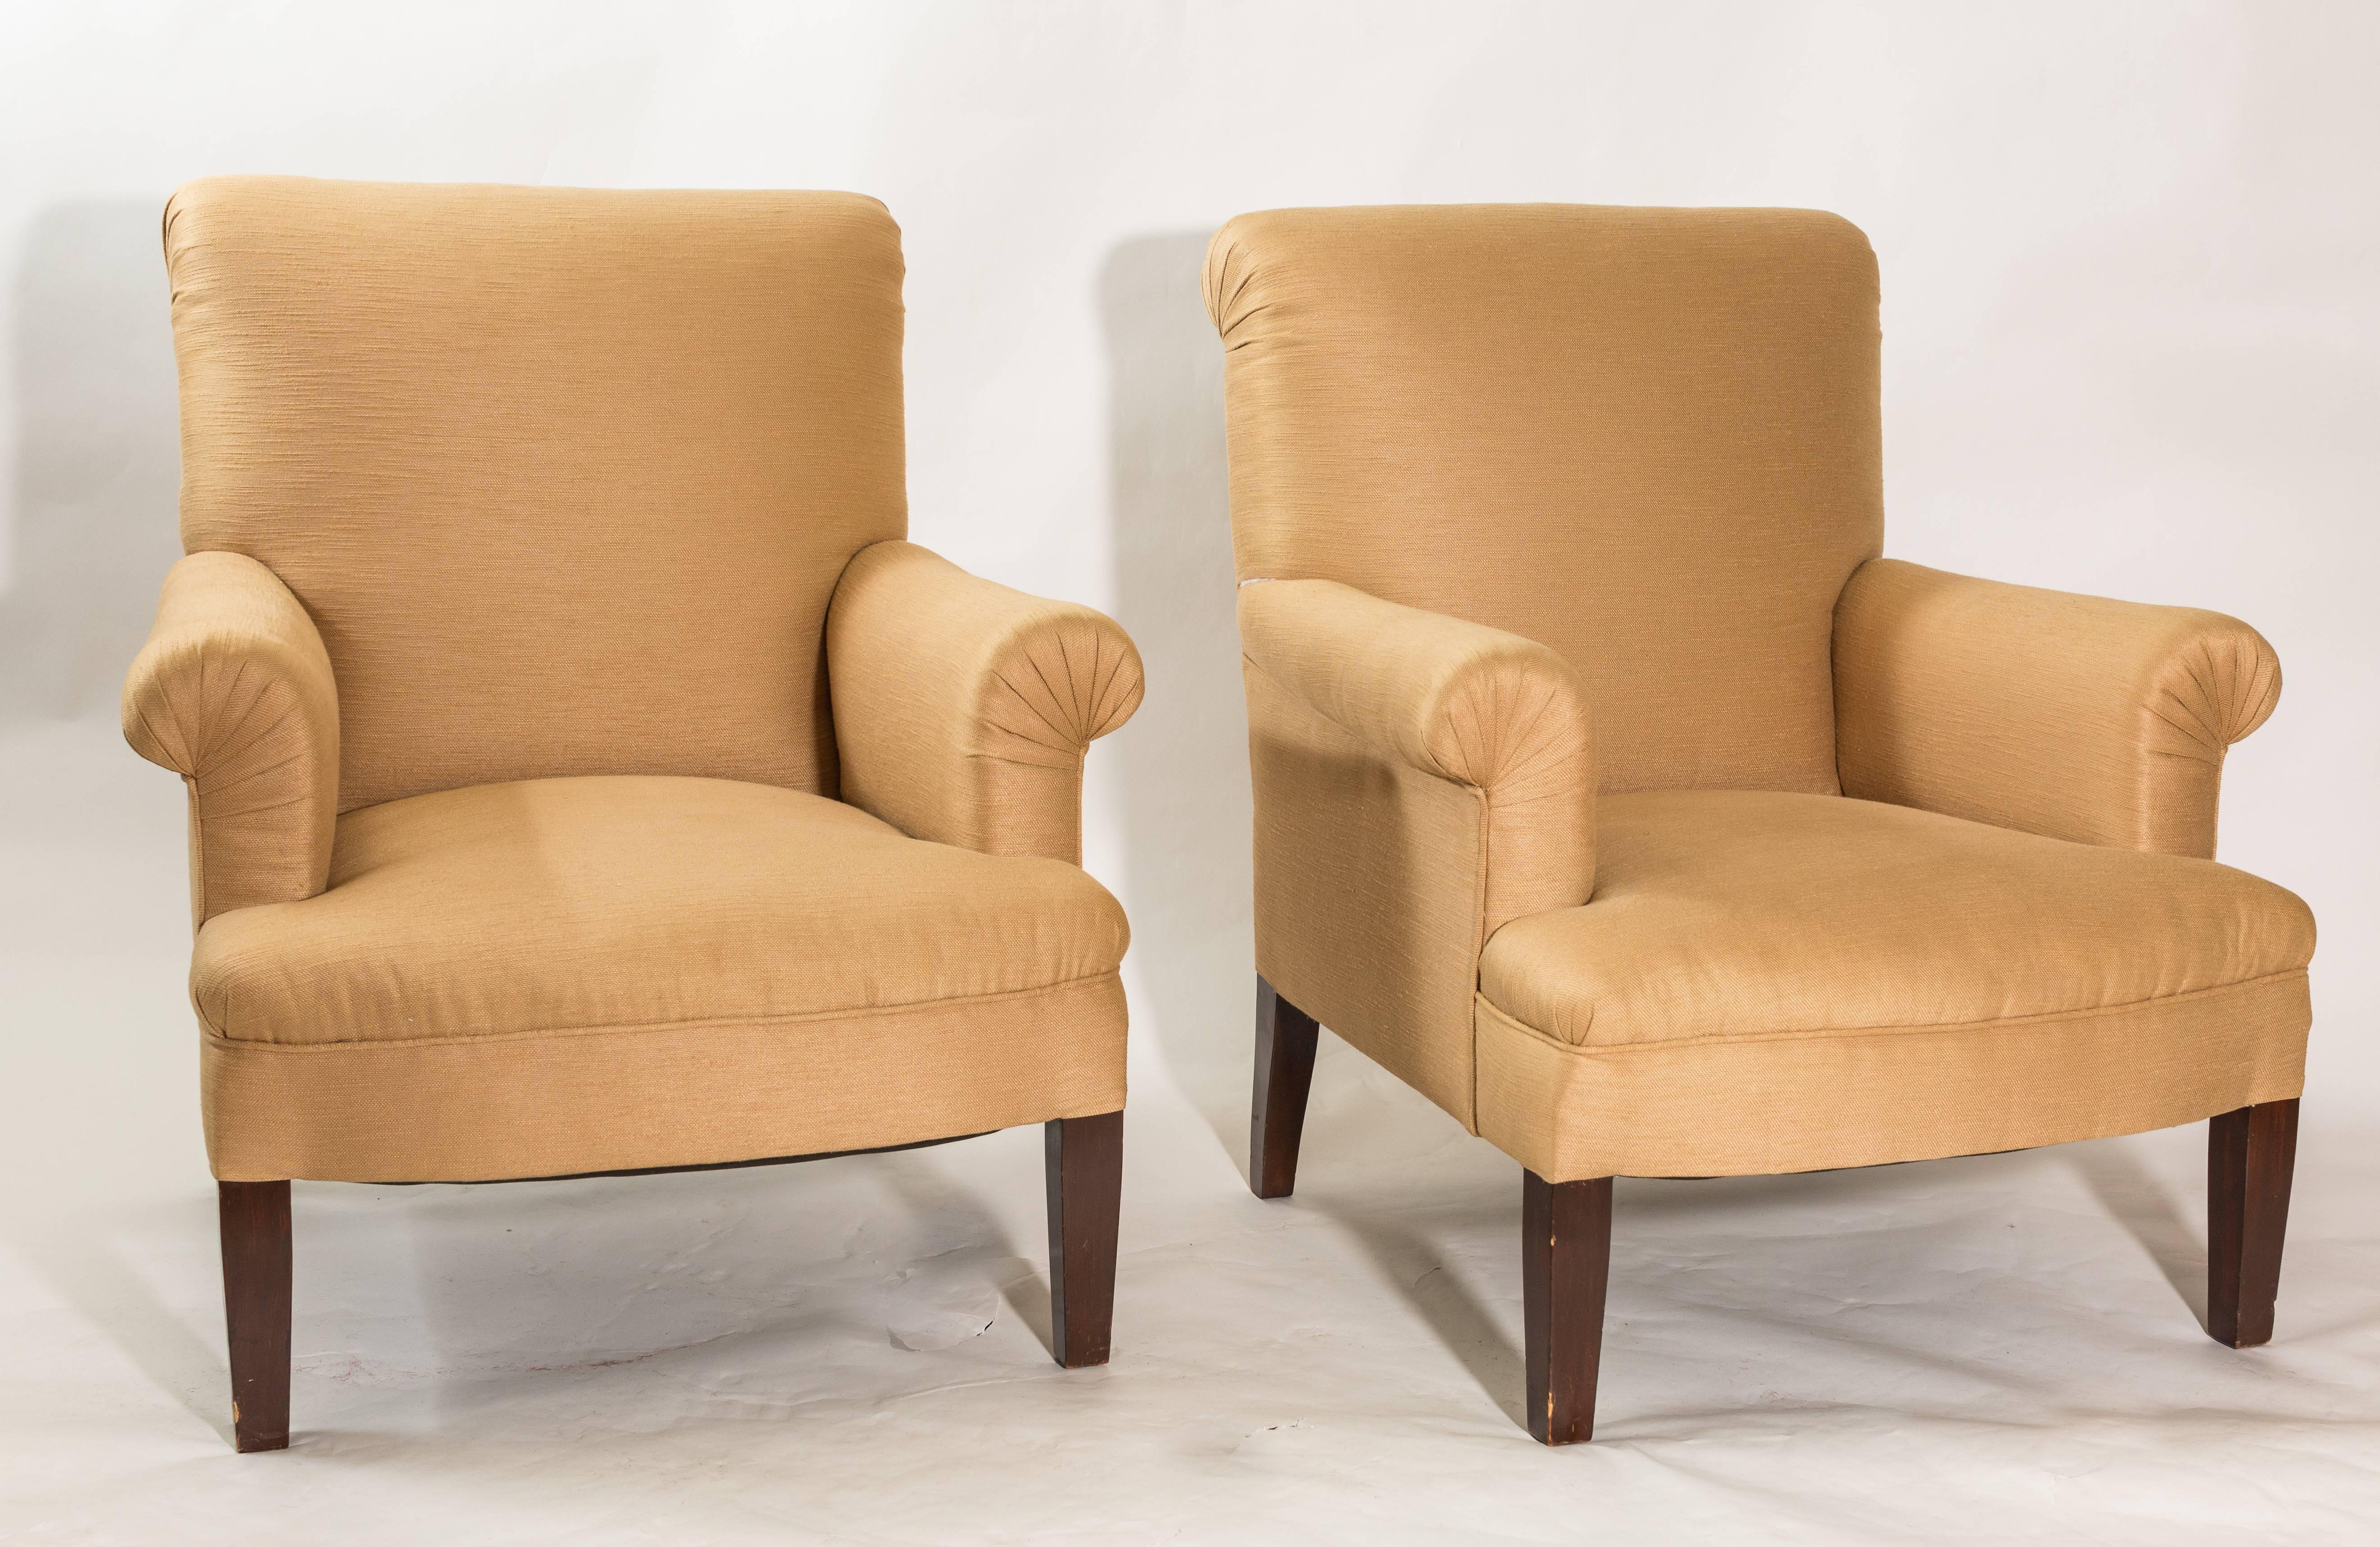 Pair of lovely Baker armchairs, sit lower to ground. Rich beige linen in color with a fanned rouche arm finish. Tapered Mid-Century Modern legs.